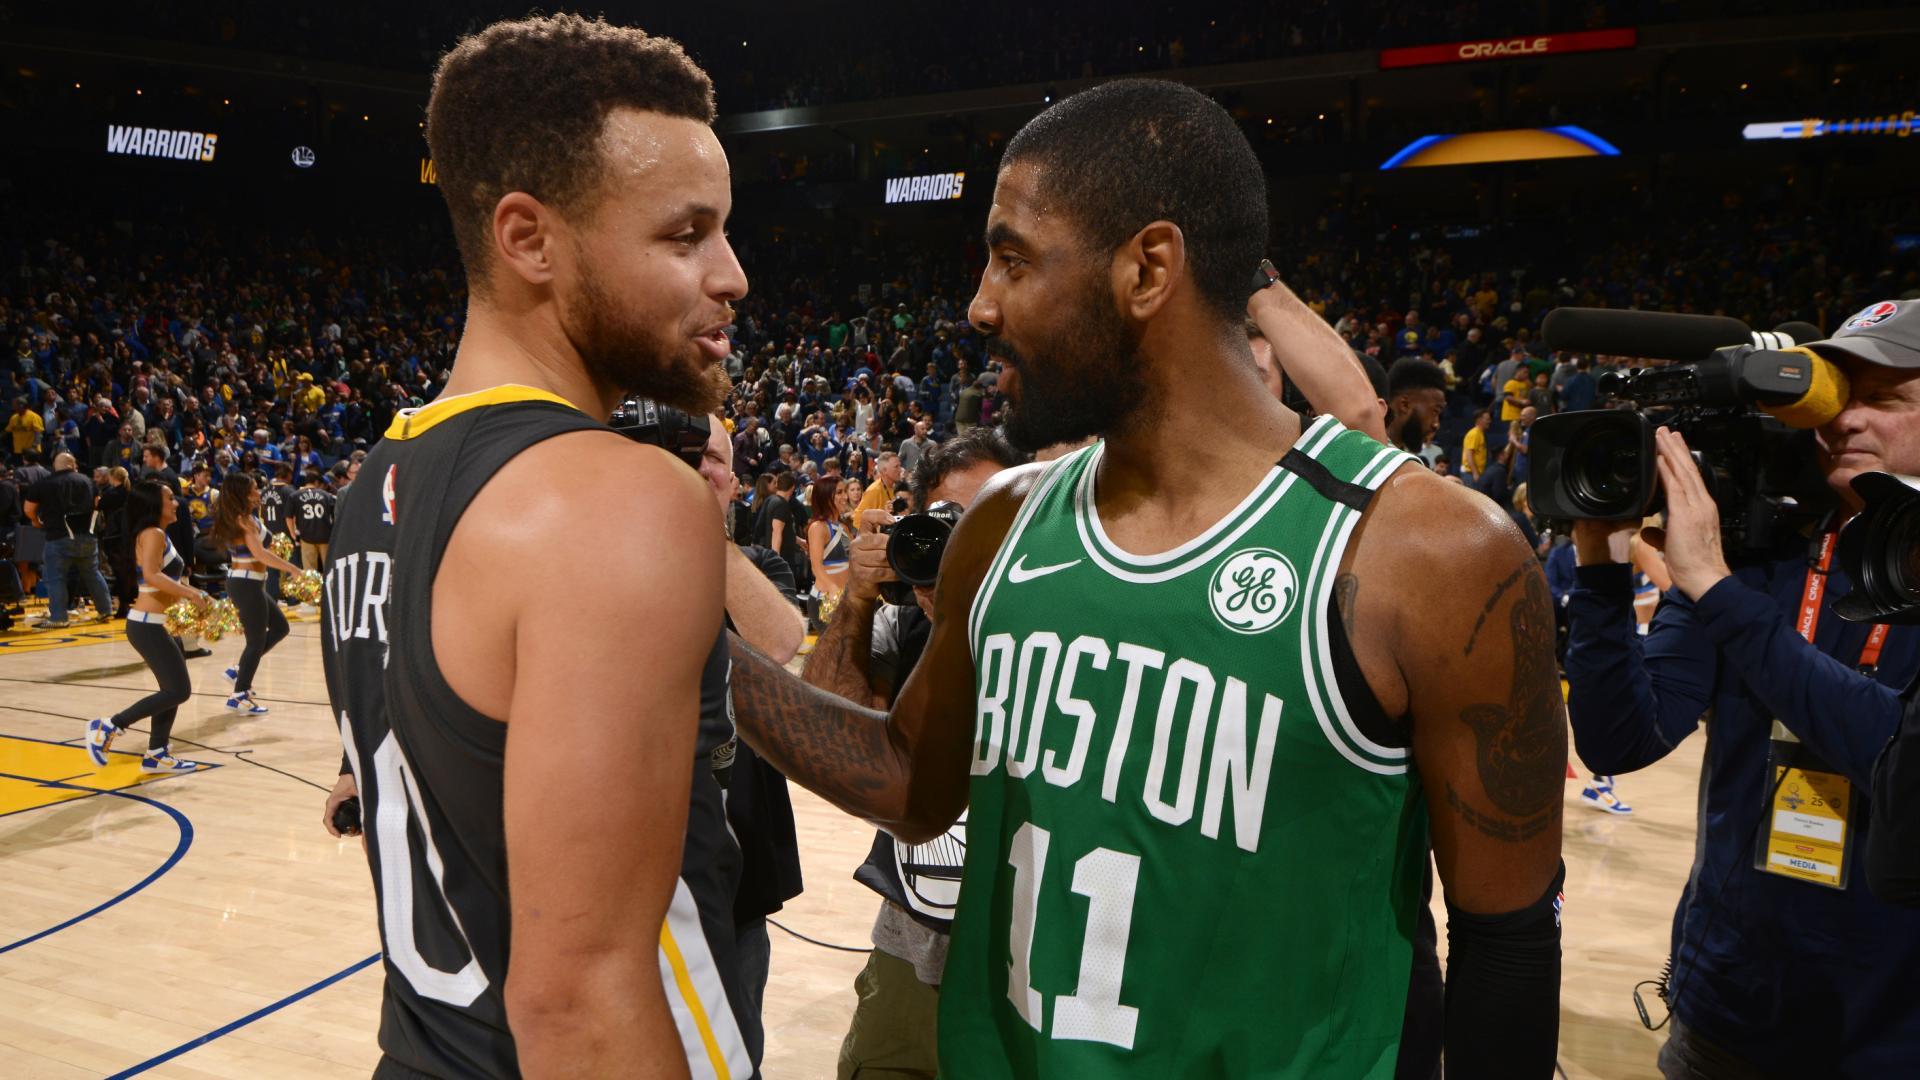 Stephen Curry on Kyrie Irving: We bring 'best out of each other'